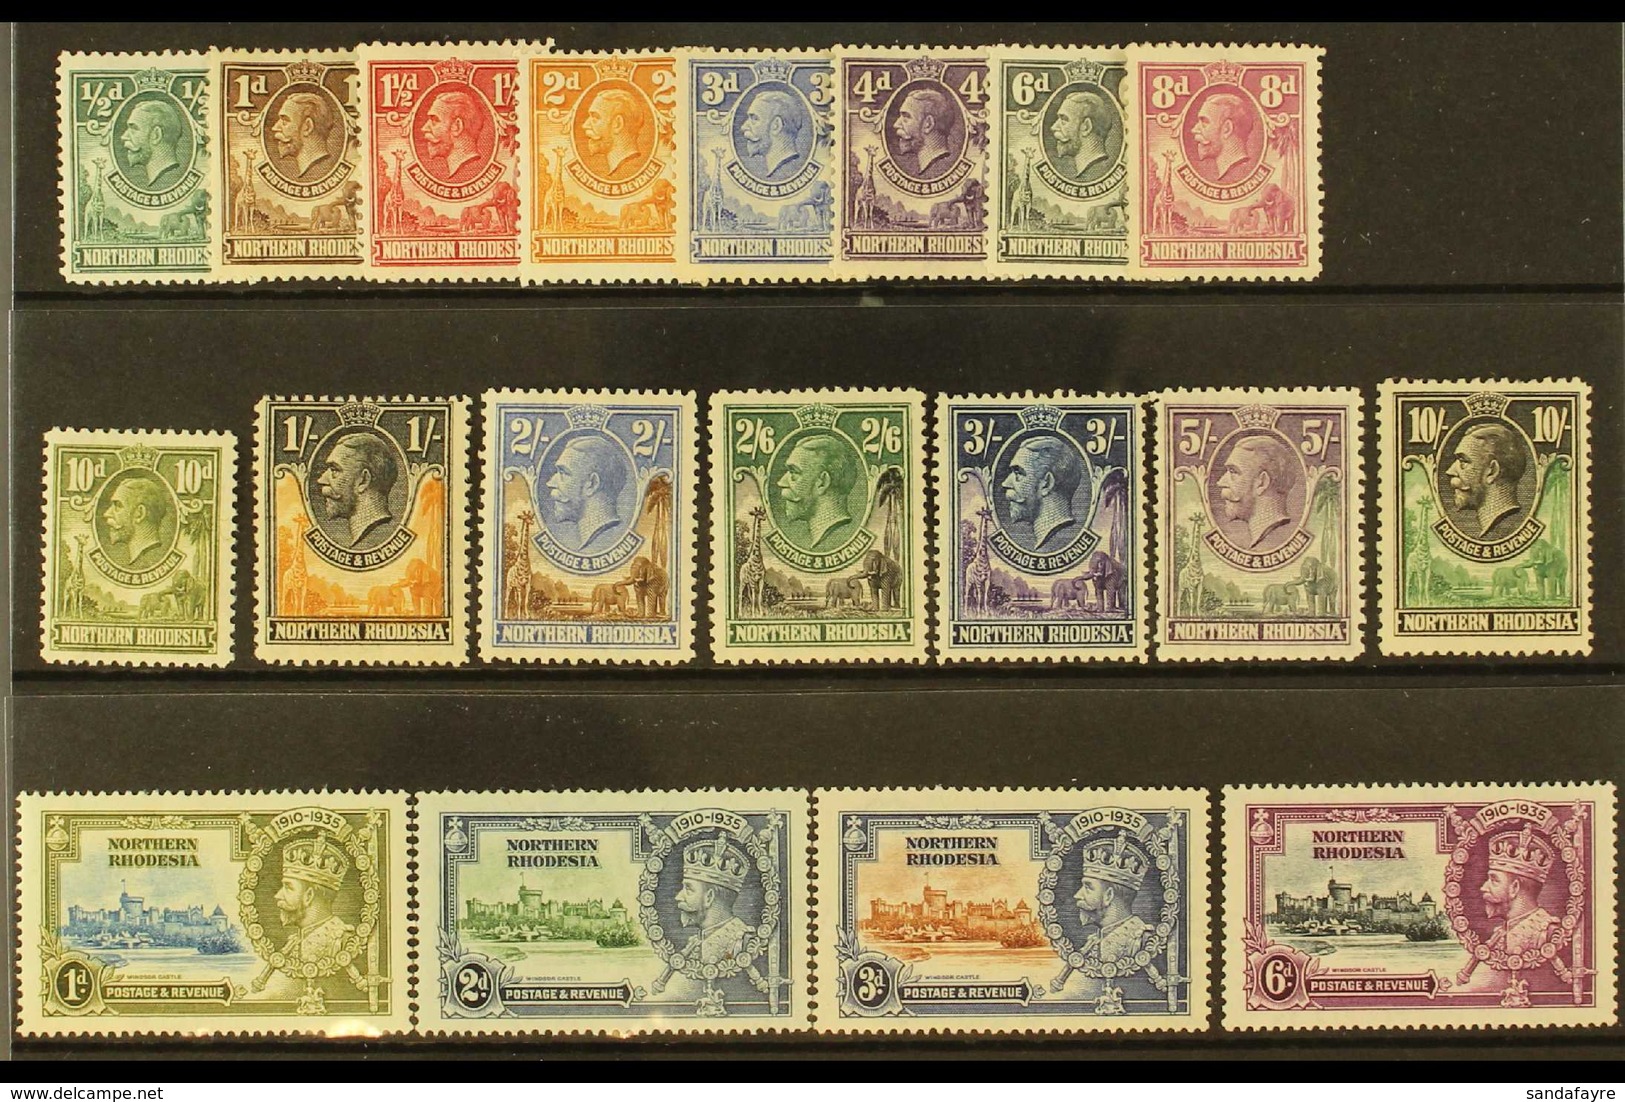 1925-36 KGV MINT COLLECTION Presented On A Stock Card That Includes 1925-29 Definitive Range With Most Values To 5s & 10 - Rhodesia Del Nord (...-1963)